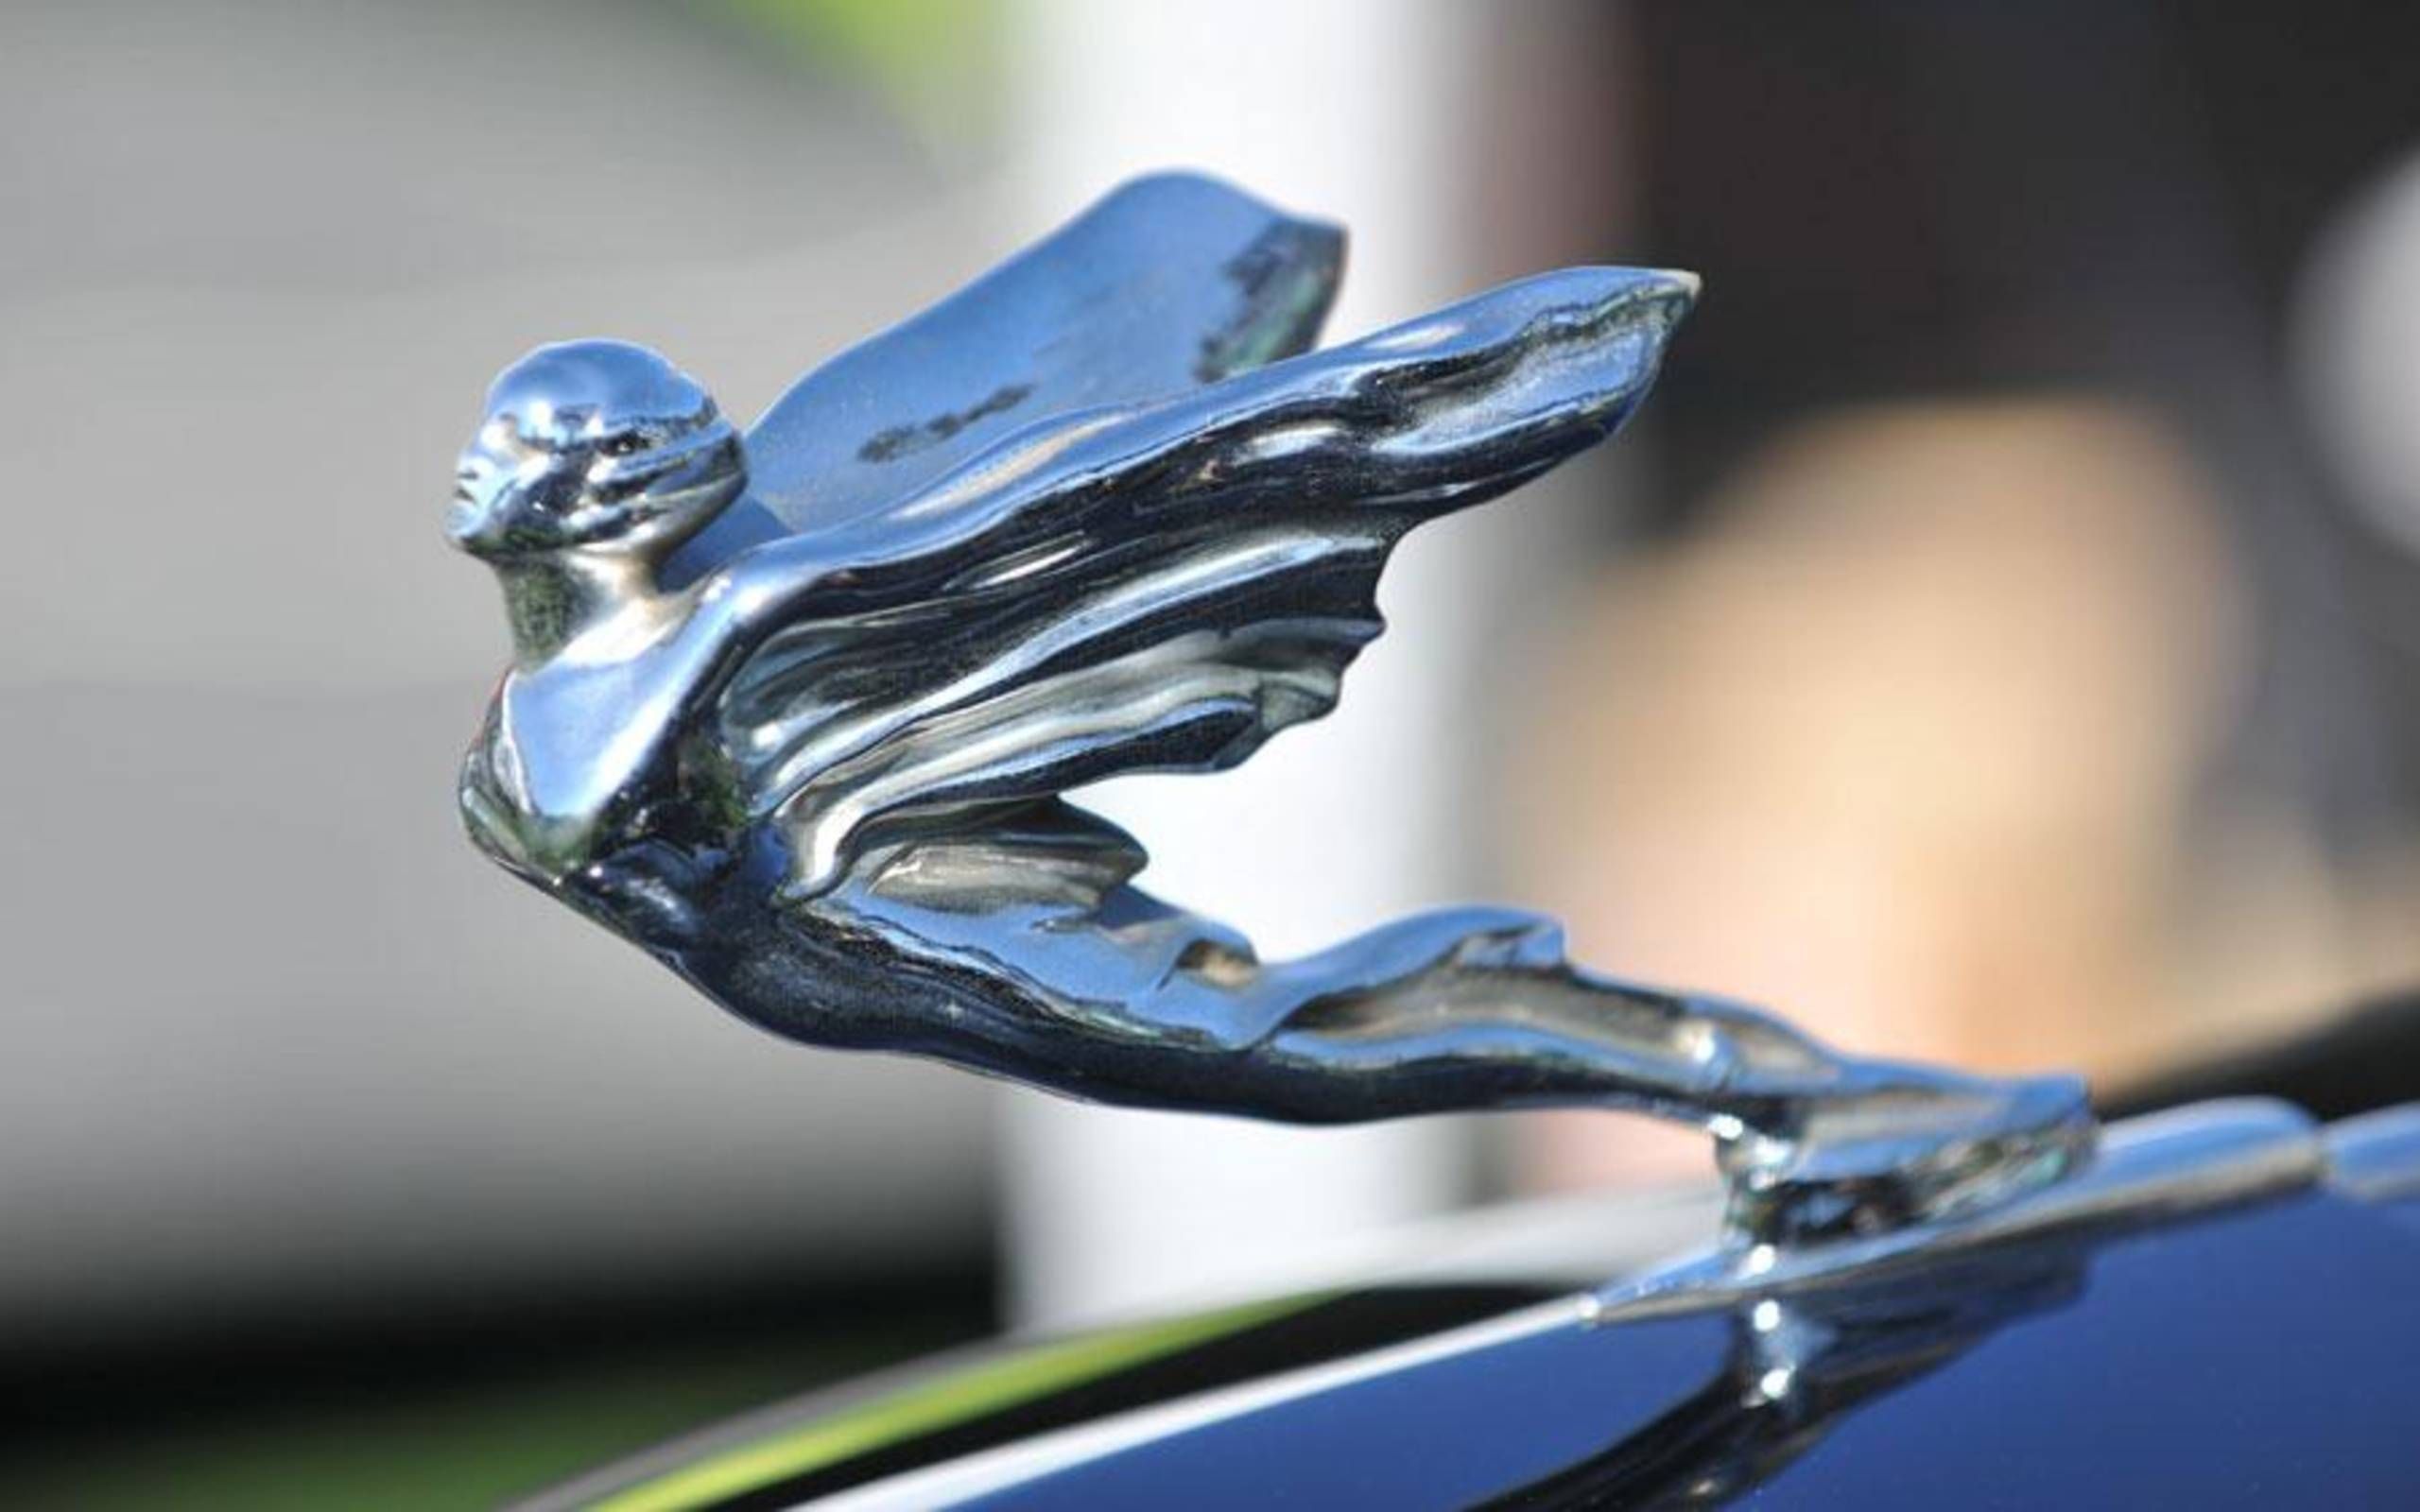 Hood-ornament quiz--the answers